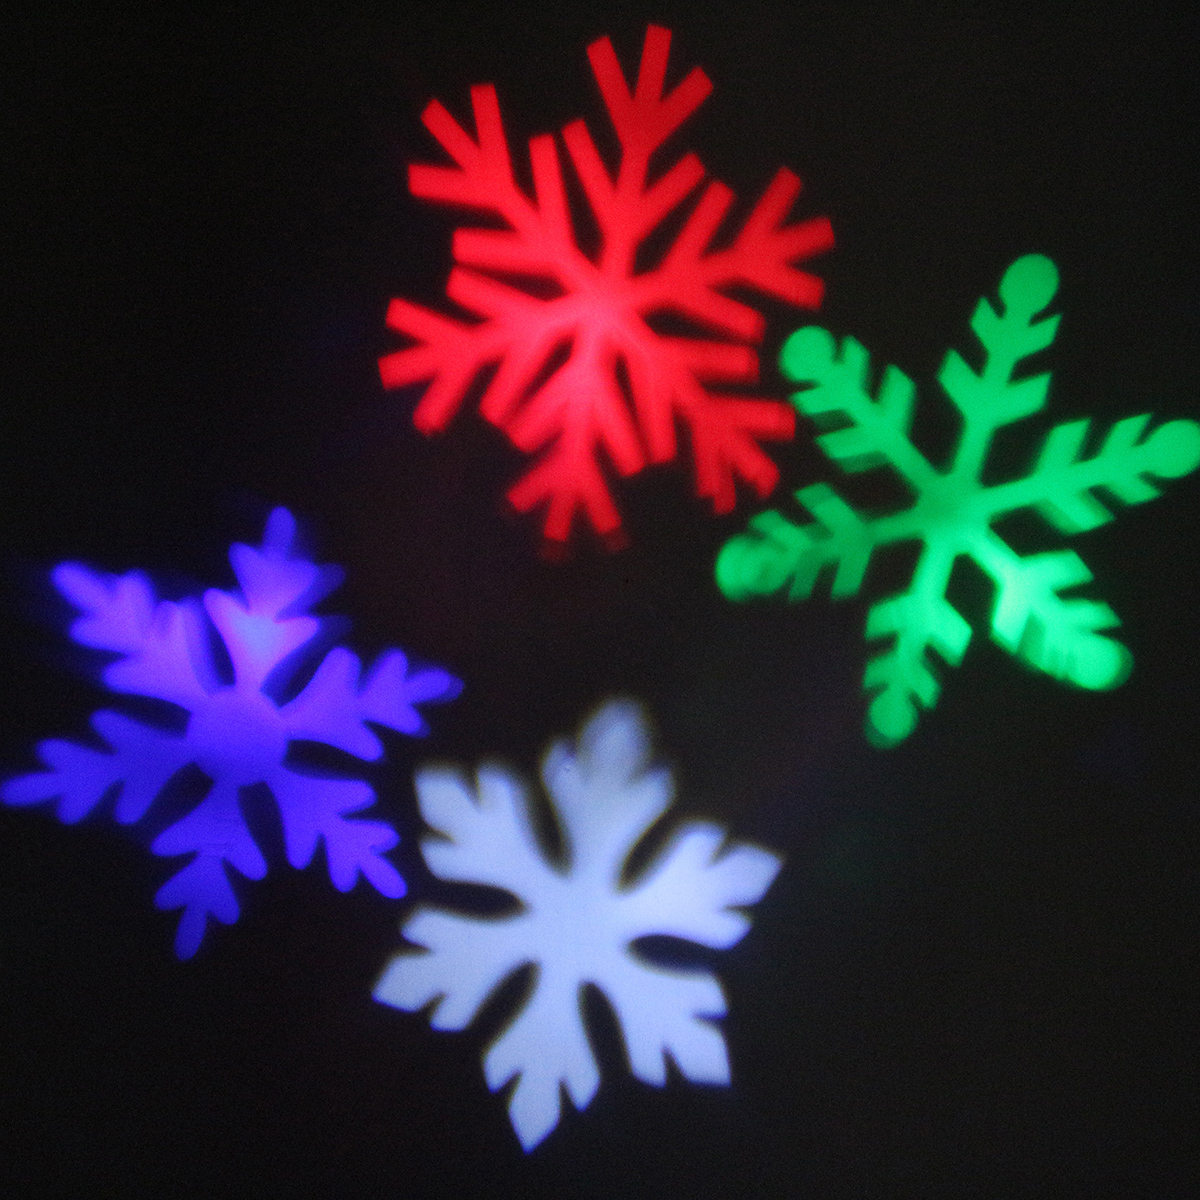 Waterproof-Snowflake-LED-Projector-Stage-Light-Lawn-Garden-Xmas-Party-Decoration-Lamp-Christmas-Deco-1111870-2